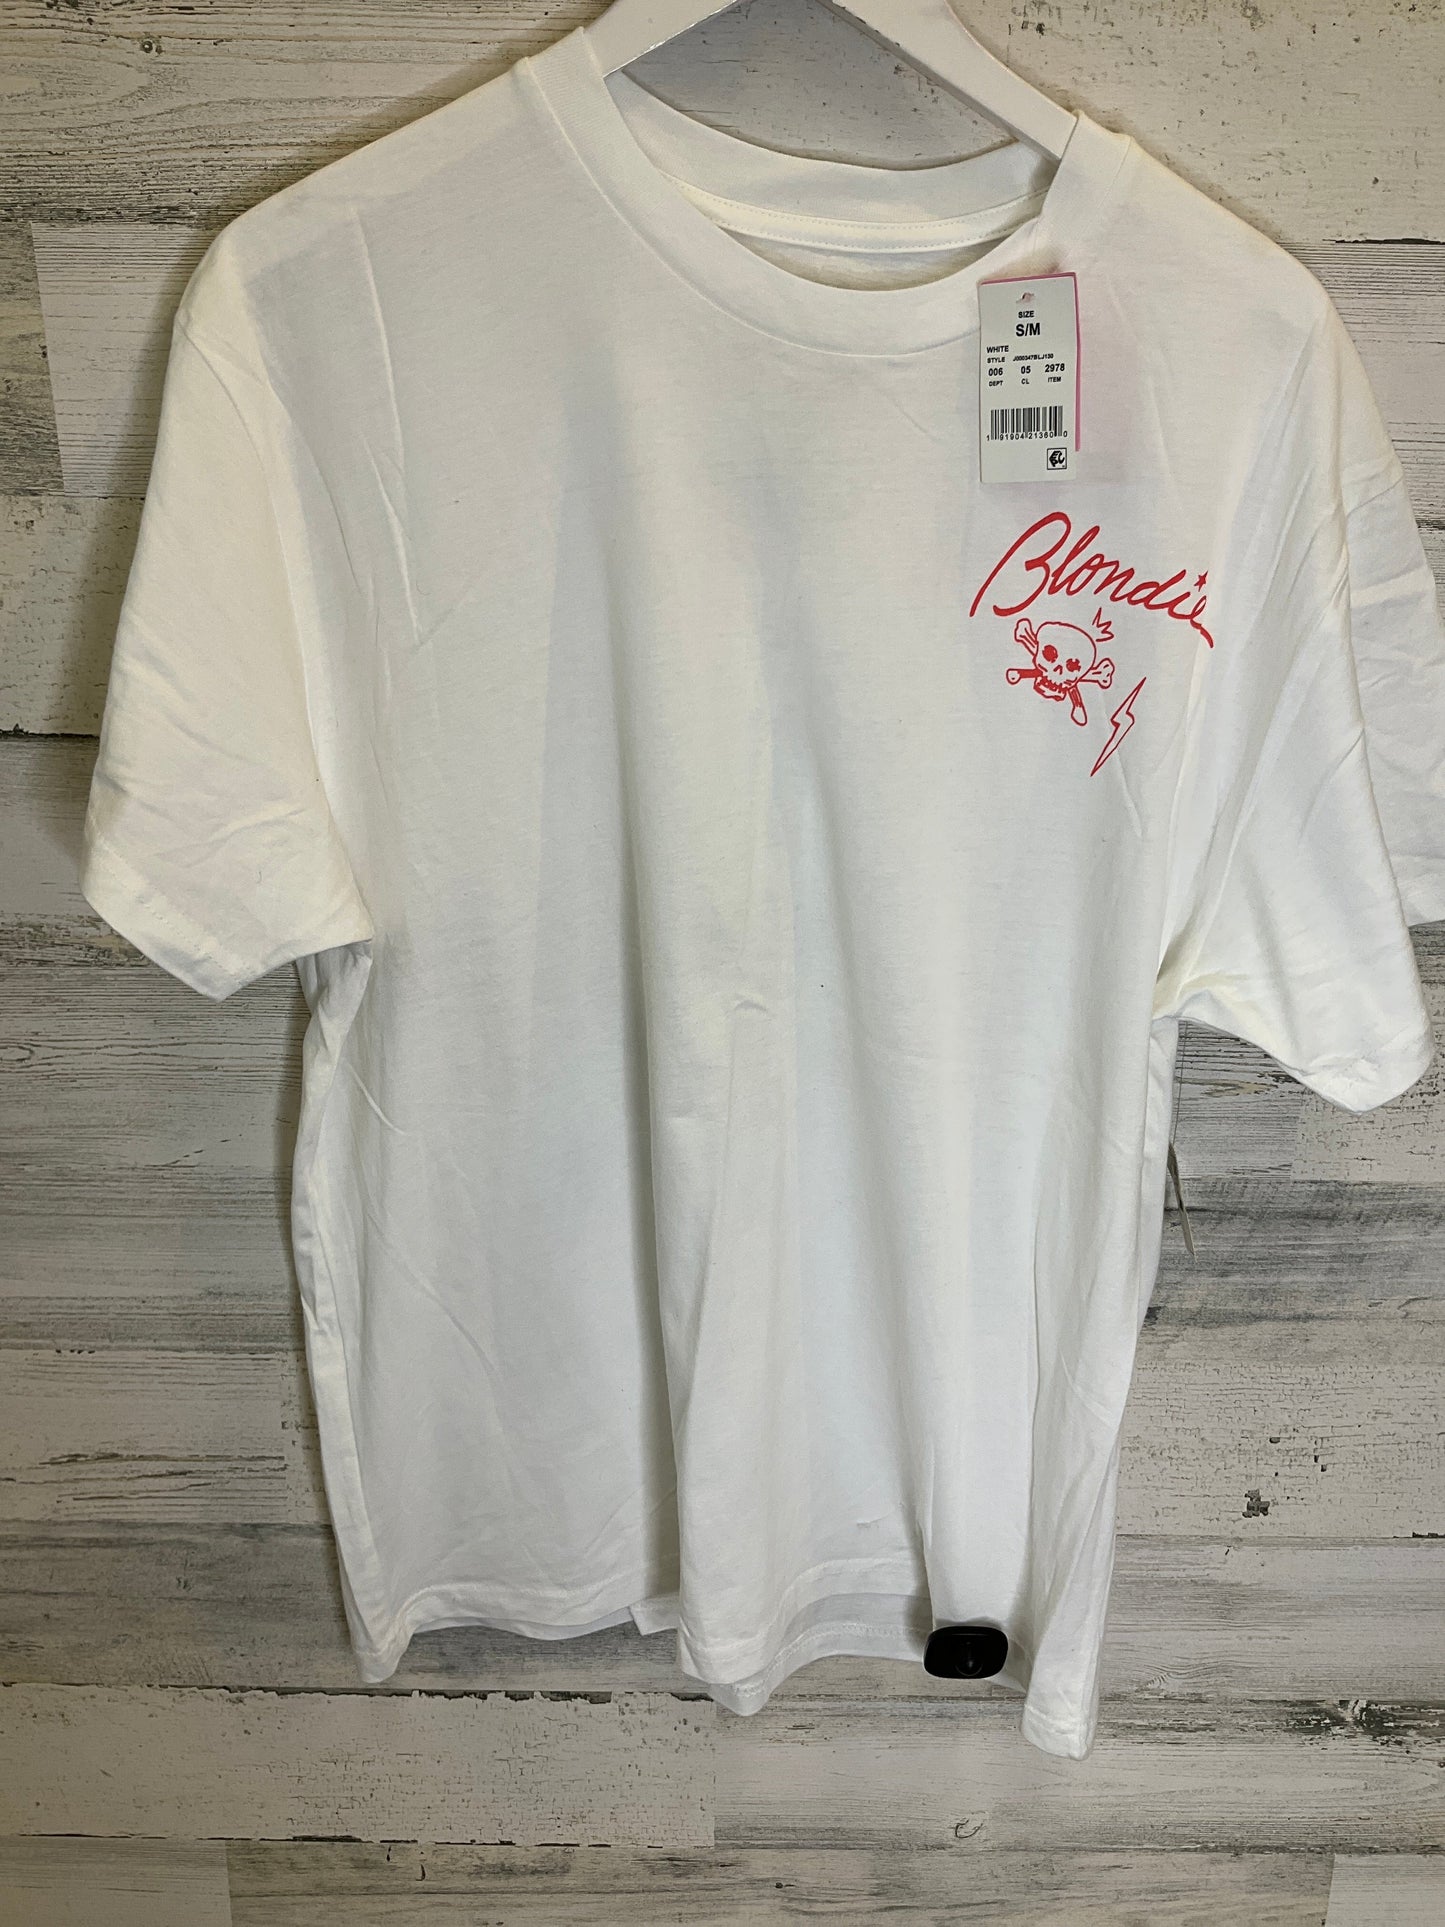 White Top Short Sleeve Clothes Mentor, Size S